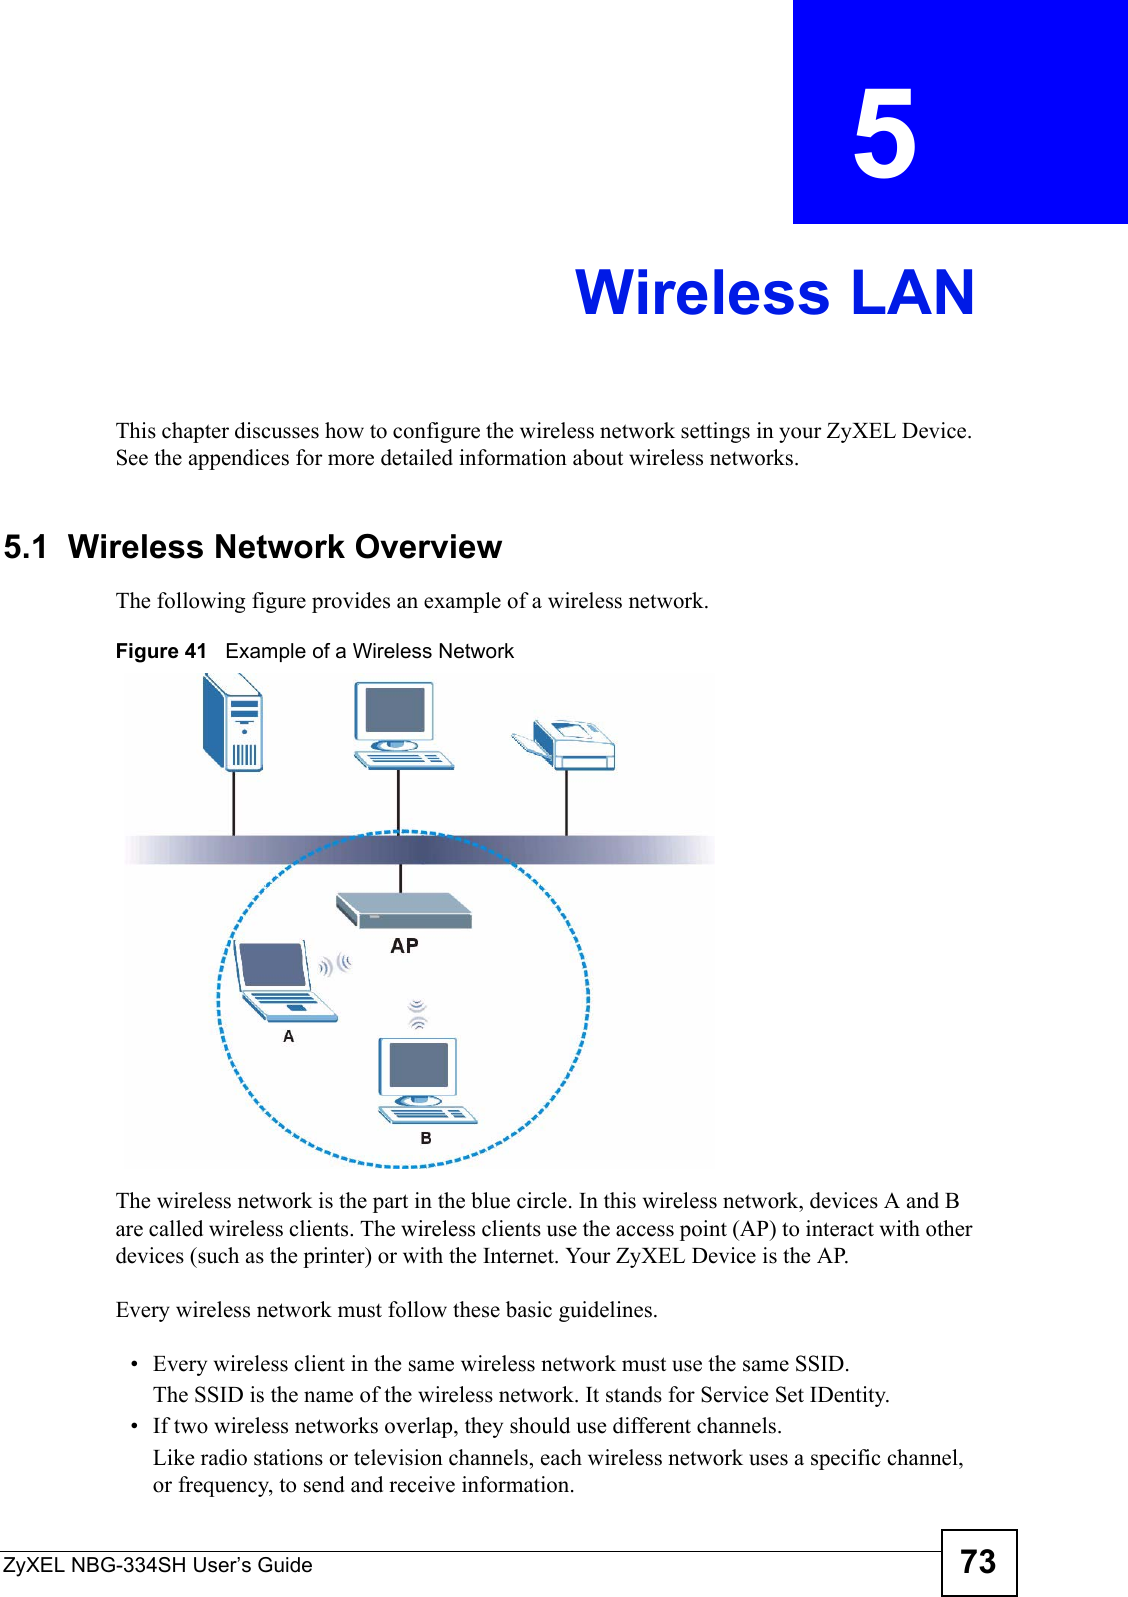 ZyXEL NBG-334SH User’s Guide 73CHAPTER  5 Wireless LANThis chapter discusses how to configure the wireless network settings in your ZyXEL Device. See the appendices for more detailed information about wireless networks.5.1  Wireless Network OverviewThe following figure provides an example of a wireless network.Figure 41   Example of a Wireless NetworkThe wireless network is the part in the blue circle. In this wireless network, devices A and B are called wireless clients. The wireless clients use the access point (AP) to interact with other devices (such as the printer) or with the Internet. Your ZyXEL Device is the AP.Every wireless network must follow these basic guidelines.• Every wireless client in the same wireless network must use the same SSID.The SSID is the name of the wireless network. It stands for Service Set IDentity.• If two wireless networks overlap, they should use different channels.Like radio stations or television channels, each wireless network uses a specific channel, or frequency, to send and receive information.